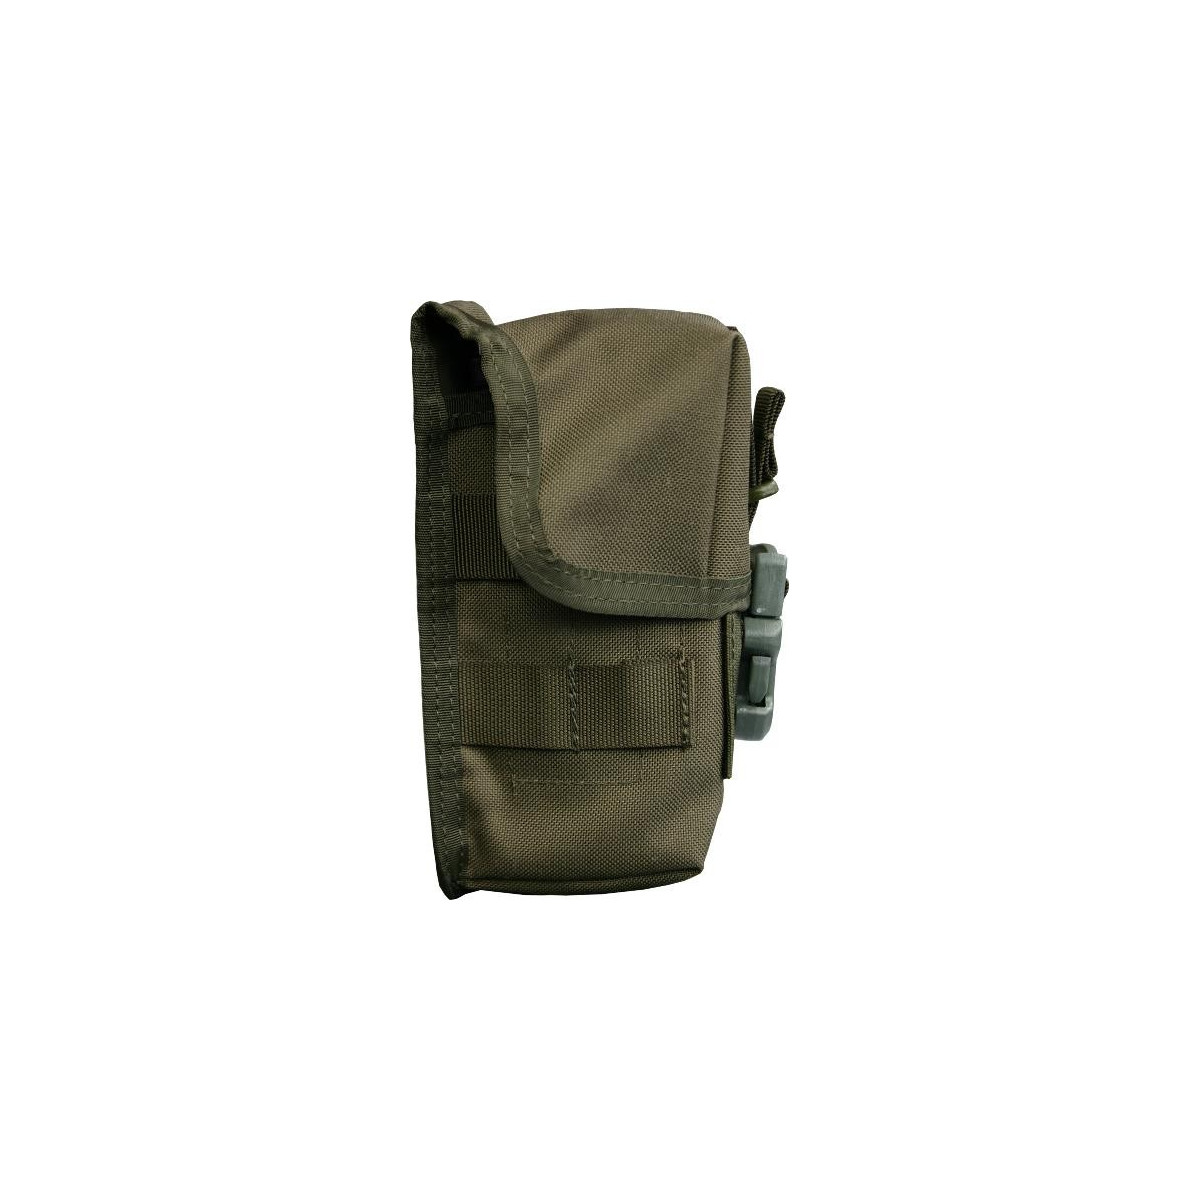 Double magazine pouch G36 closed MOLLE system